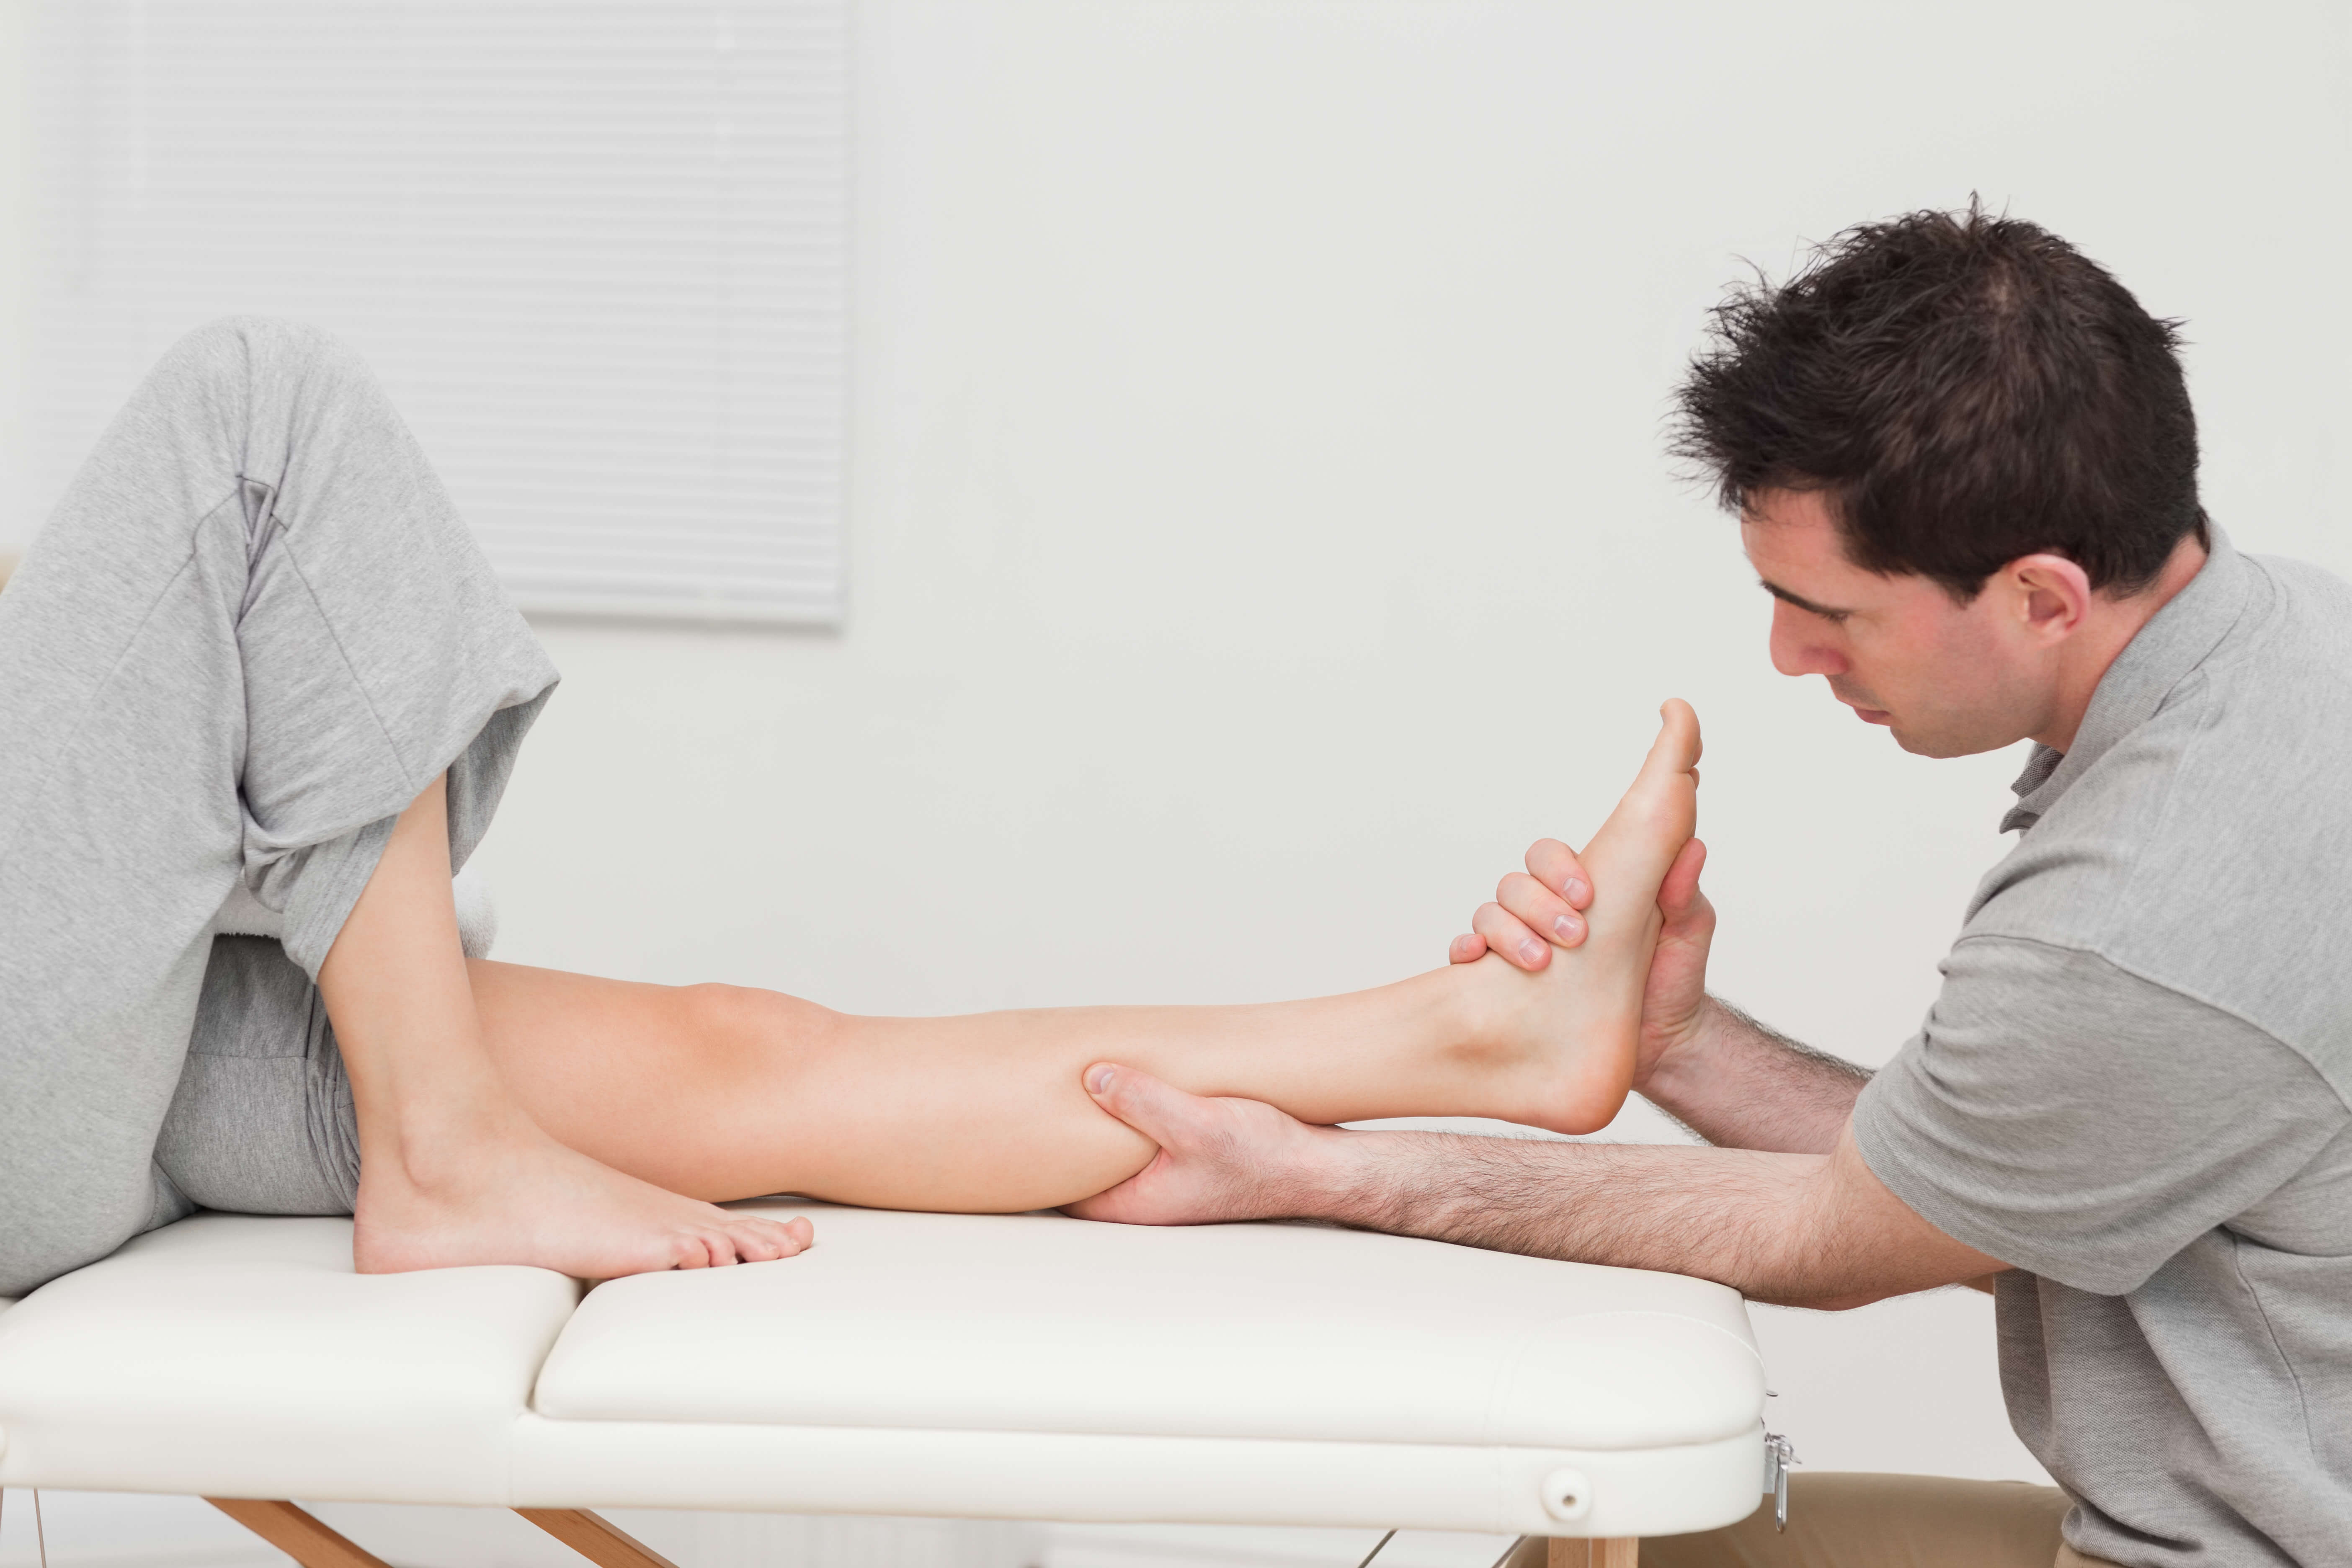 Treating Feet and Ankles